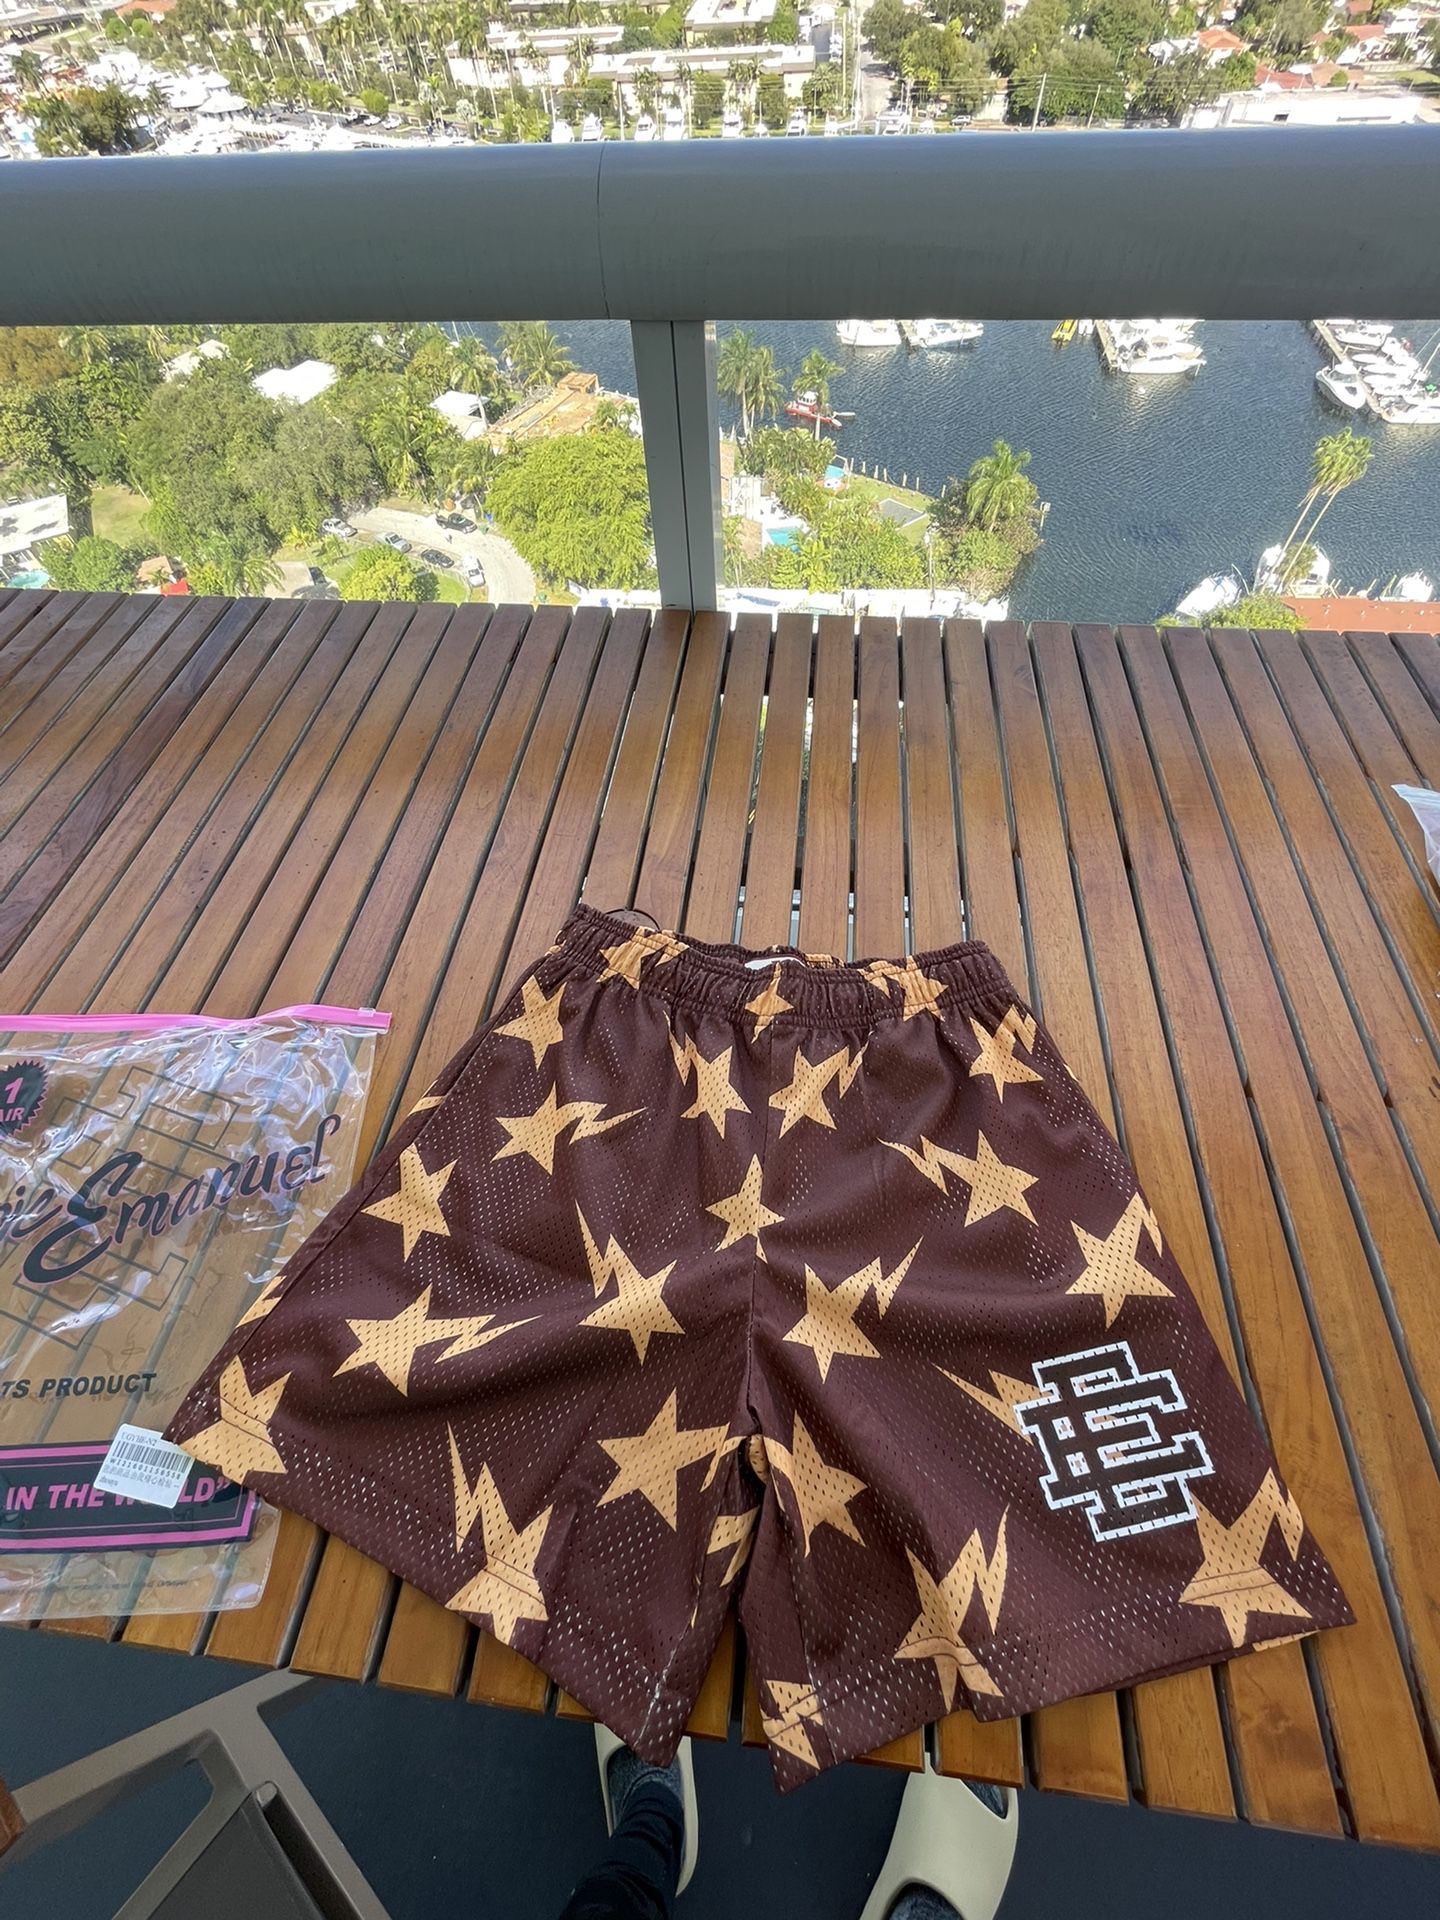 eric emanuel bape collab for Sale in Everett, MA - OfferUp